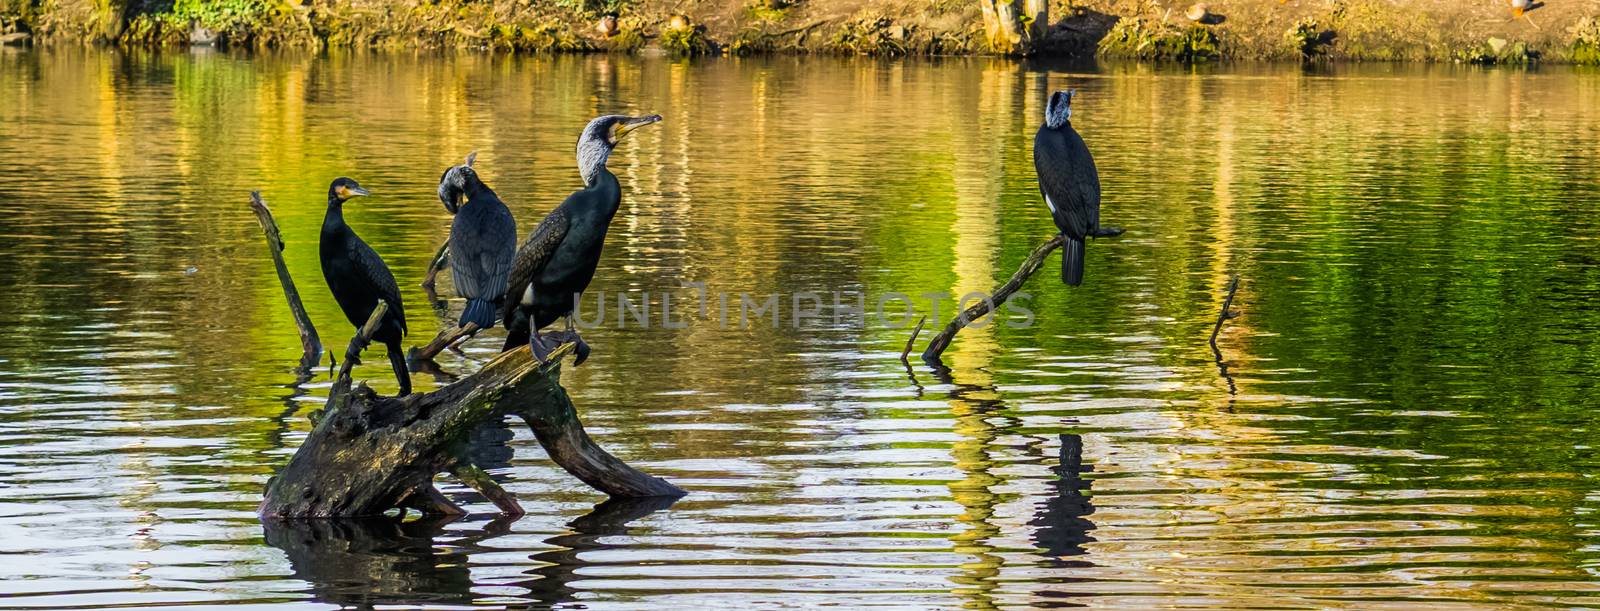 group of diverse cormorants sitting on branches above the water, well spread water birds by charlottebleijenberg